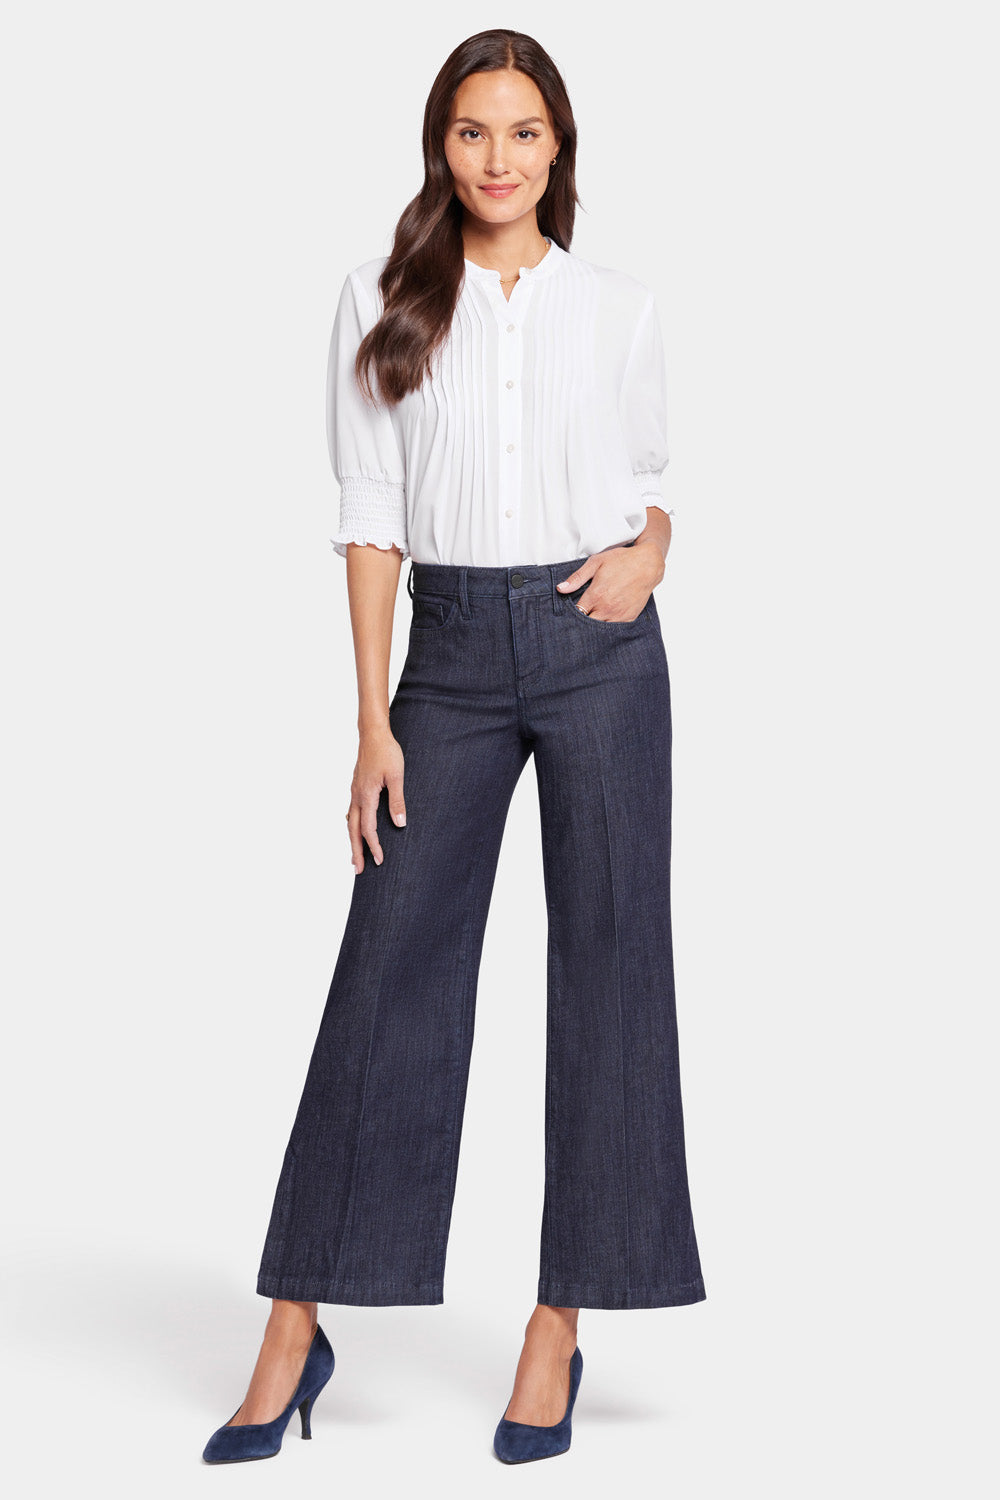 NYDJ Teresa Wide Leg Ankle Jeans With Side Plackets - Lightweight Rinse